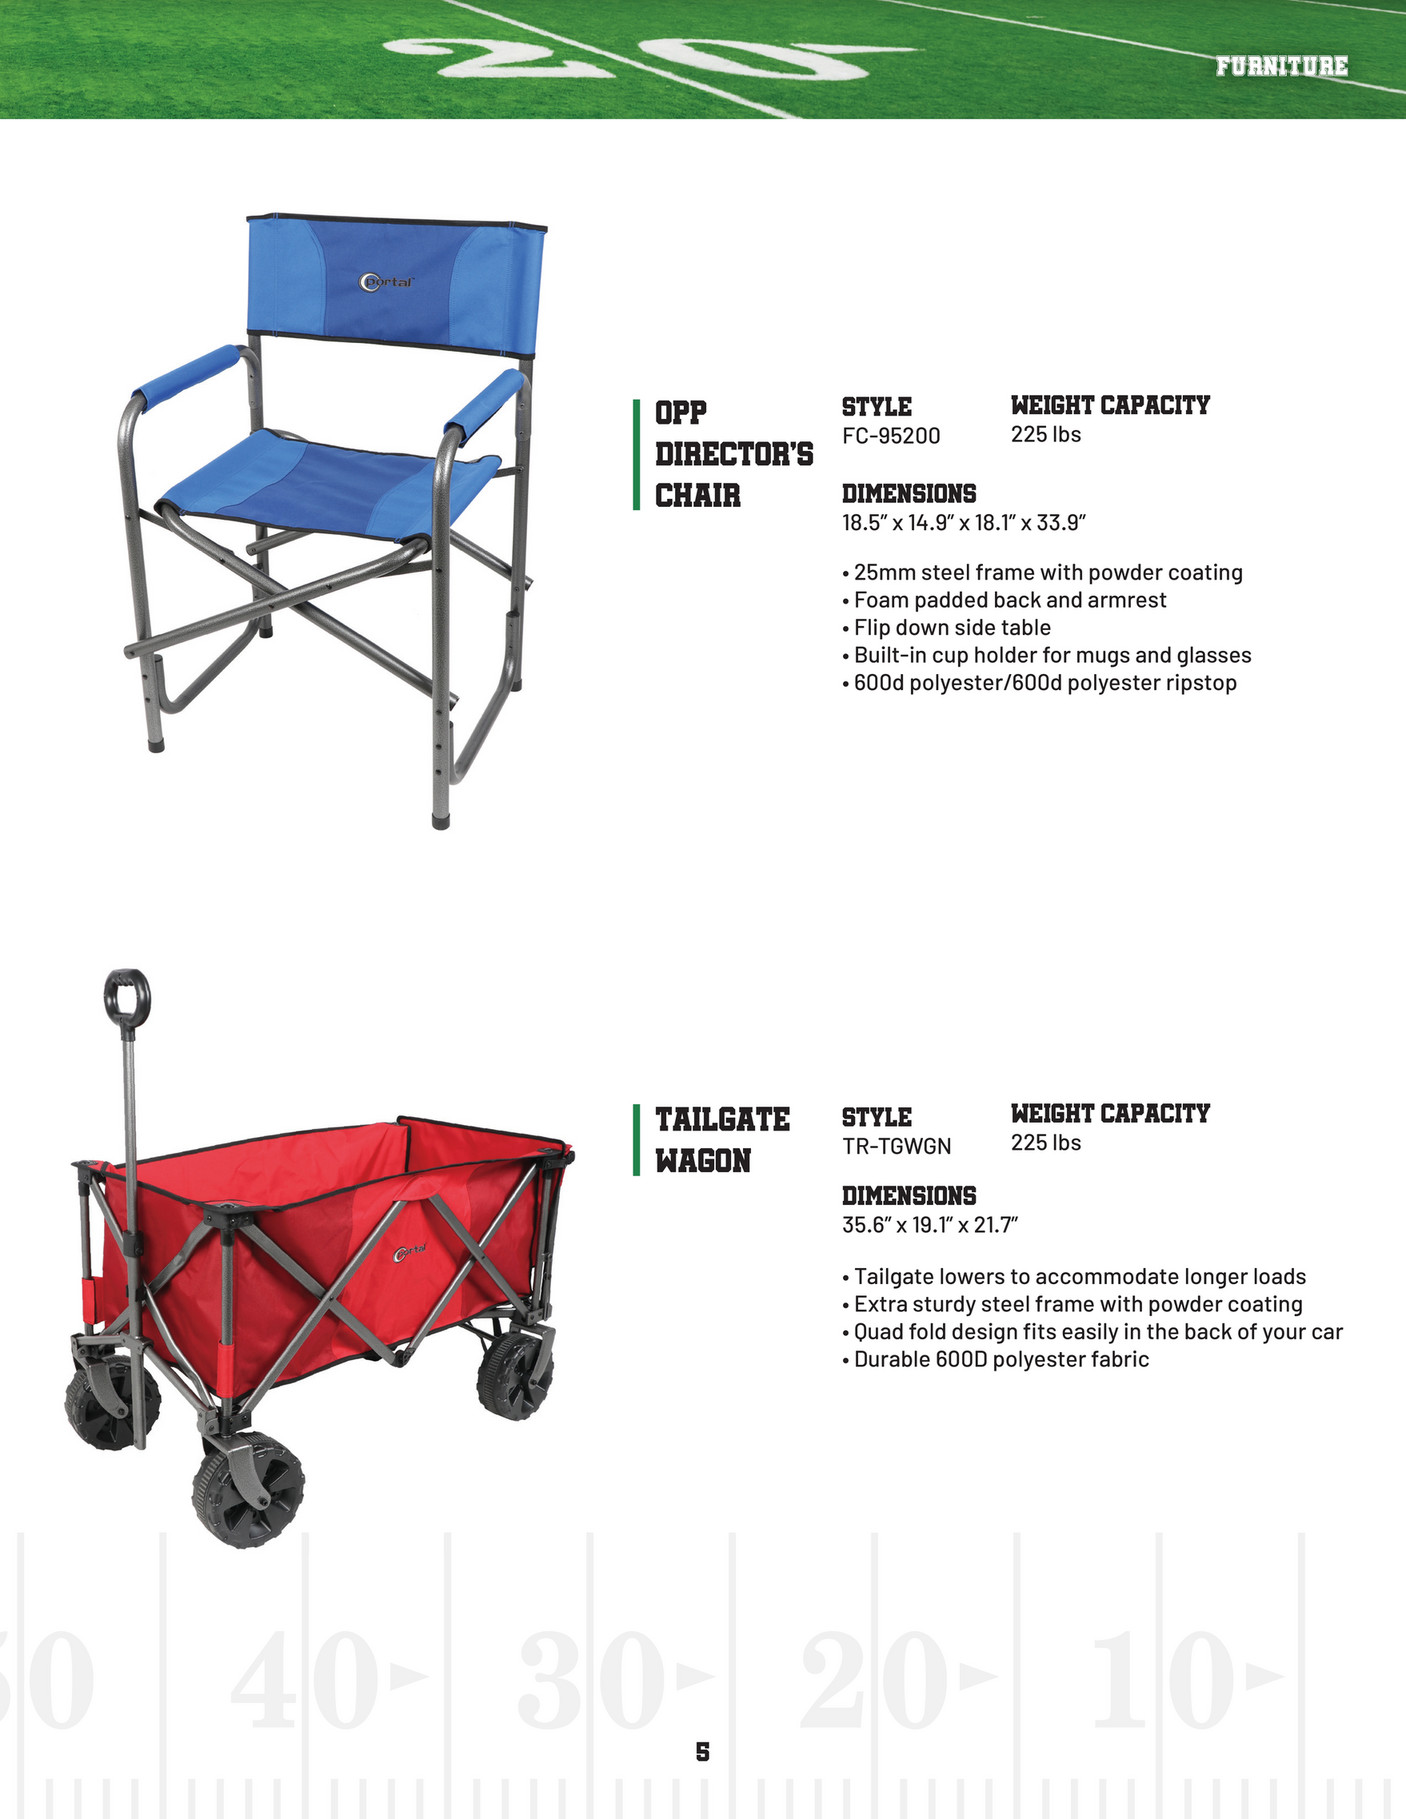 Westfield Outdoors 2021 Tailgate Catalog Page 4 5